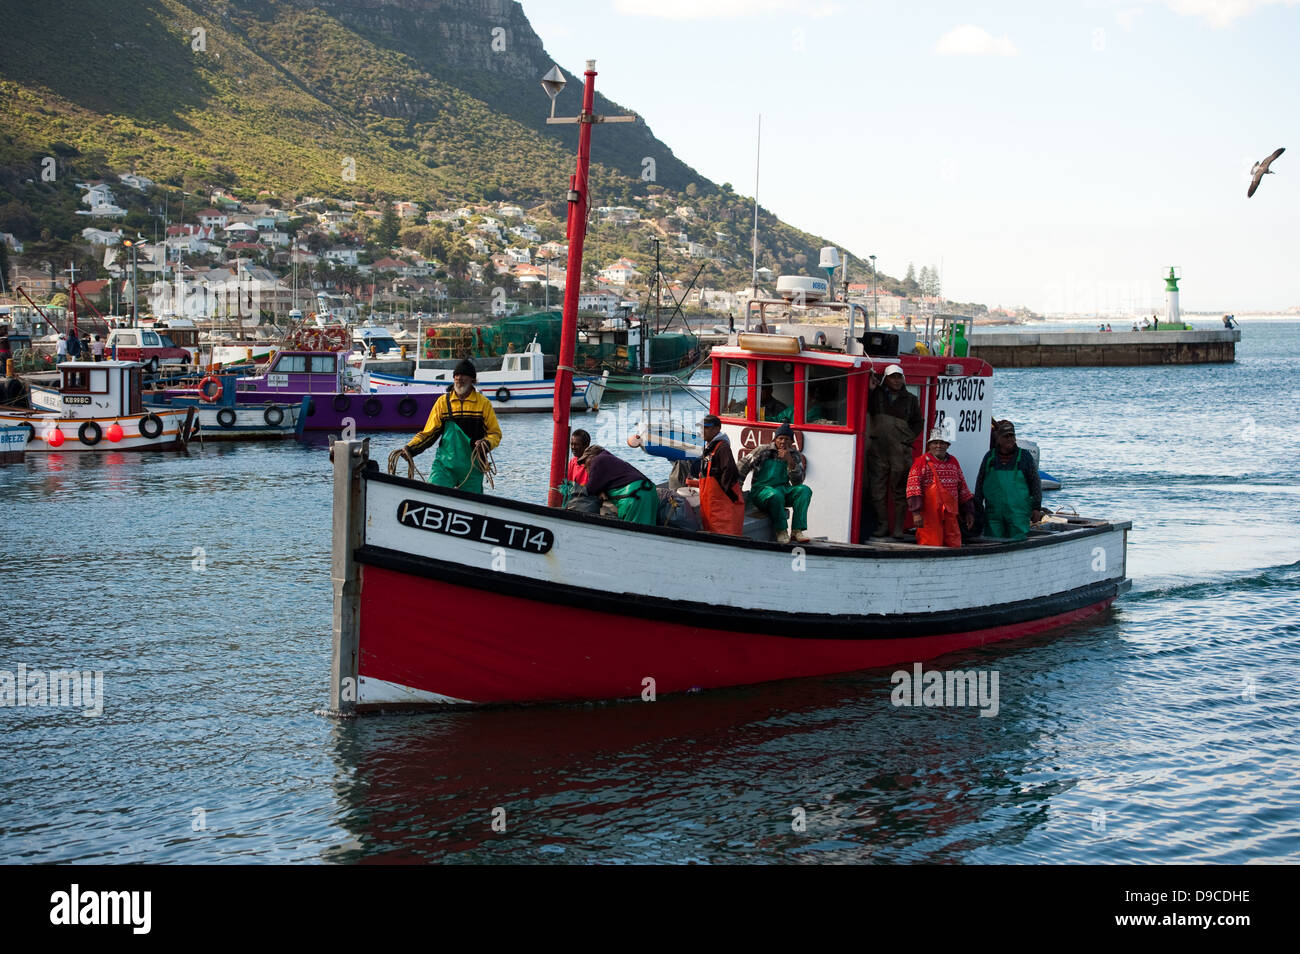 Fishing boat in the harbour, Kalk Bay, False Bay, South Africa Stock Photo